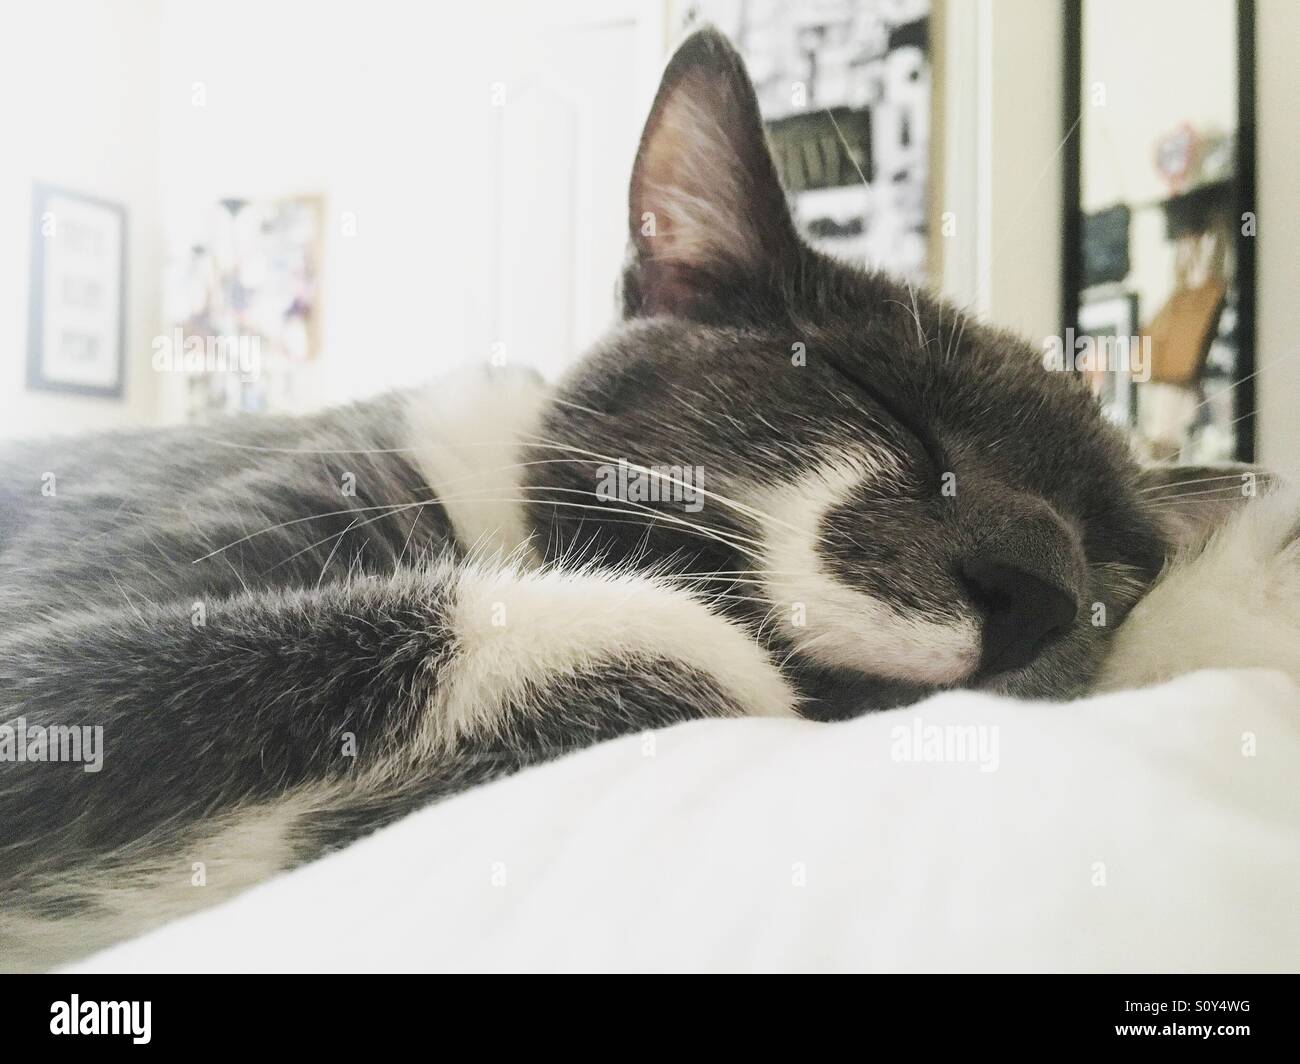 Mustache cat takes a nap Stock Photo